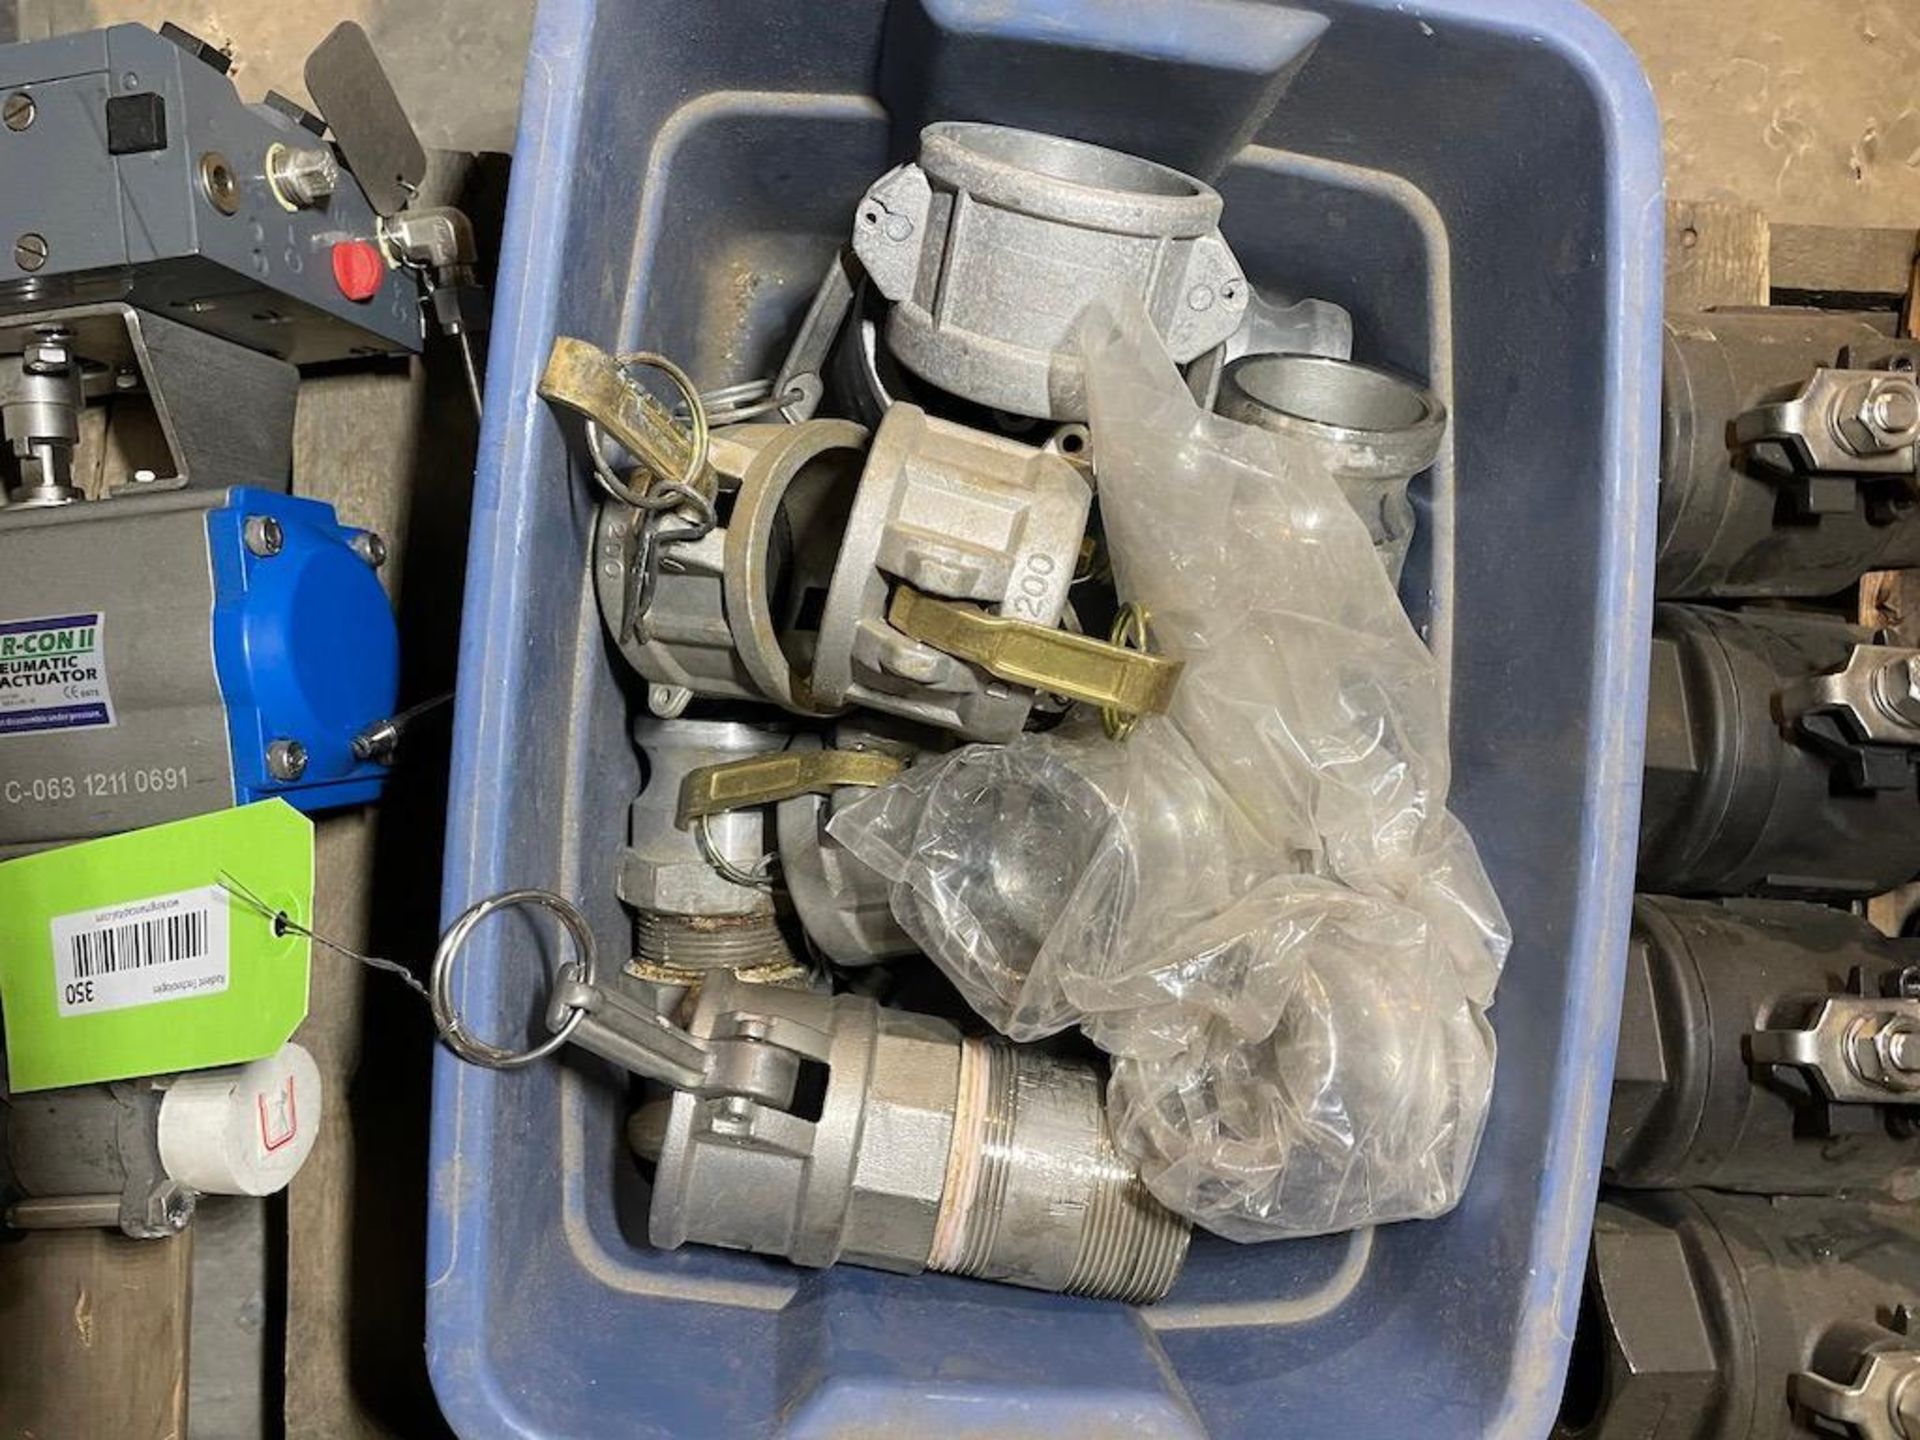 (3) SKIDS ASSORTED PNEUMATIC ACTUATORS, VALVES, FITTINGS, COMPONENTS, KNIFE VALVE, JOINTS, METERS, C - Image 5 of 22